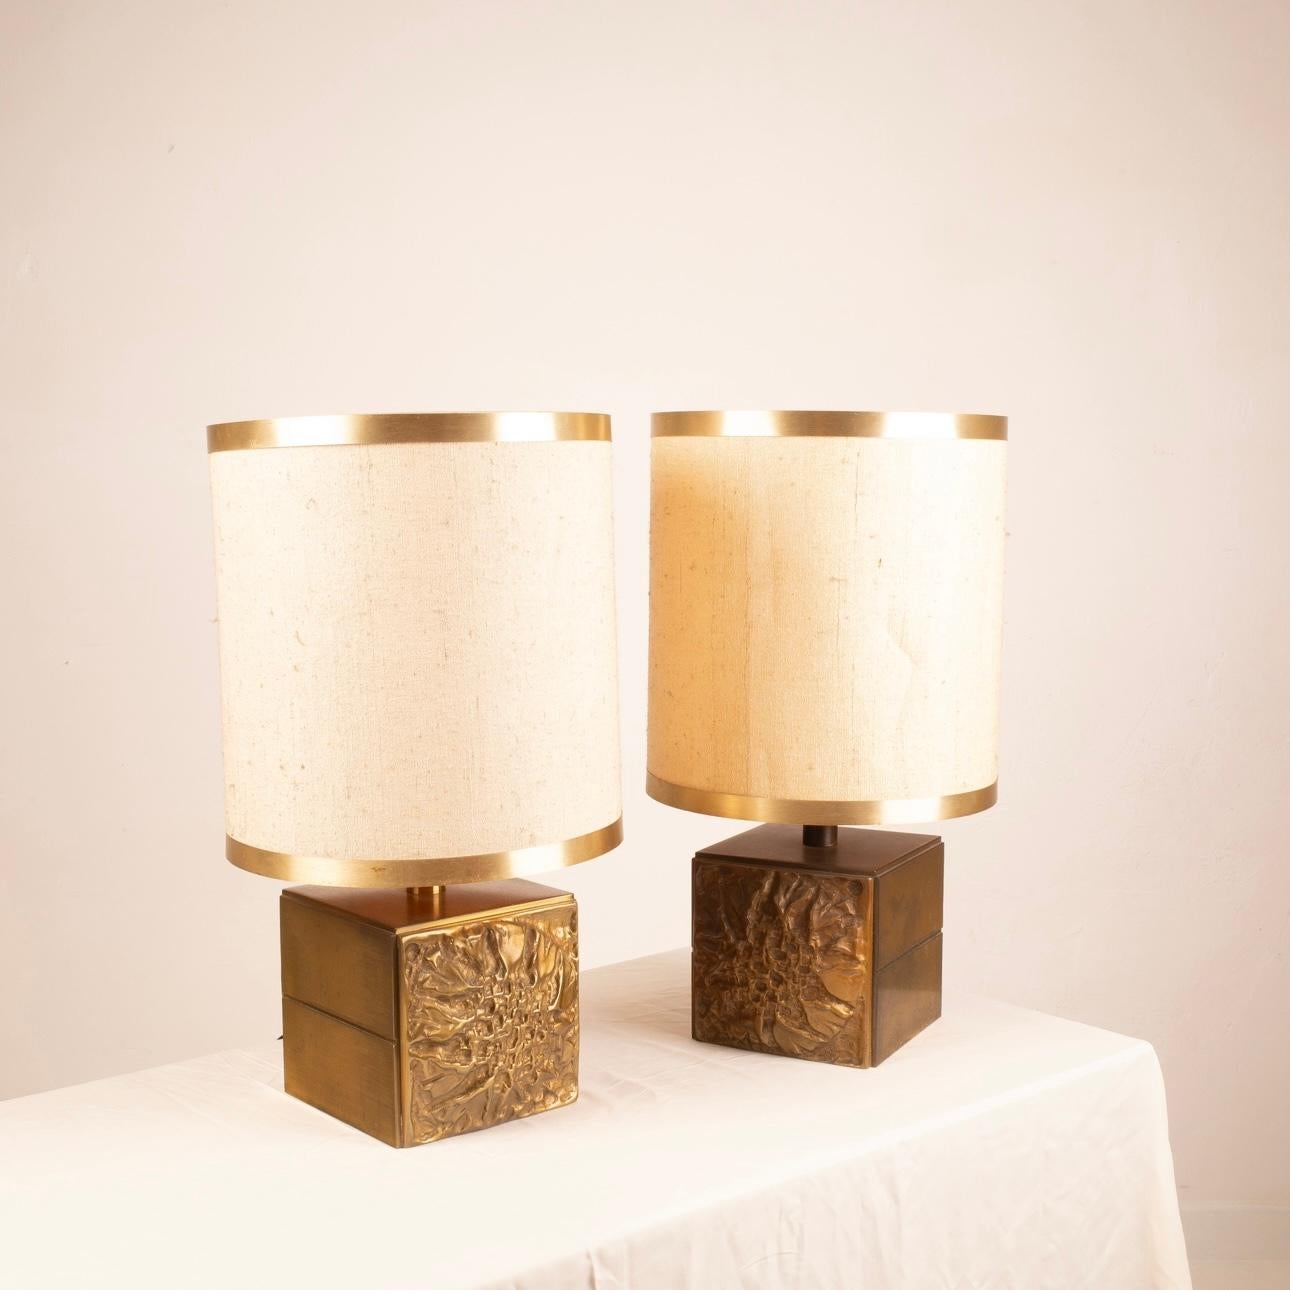 Pair of Brutalist Lamps by Luciano Frigerio for Frigerio of Desio For Sale 2